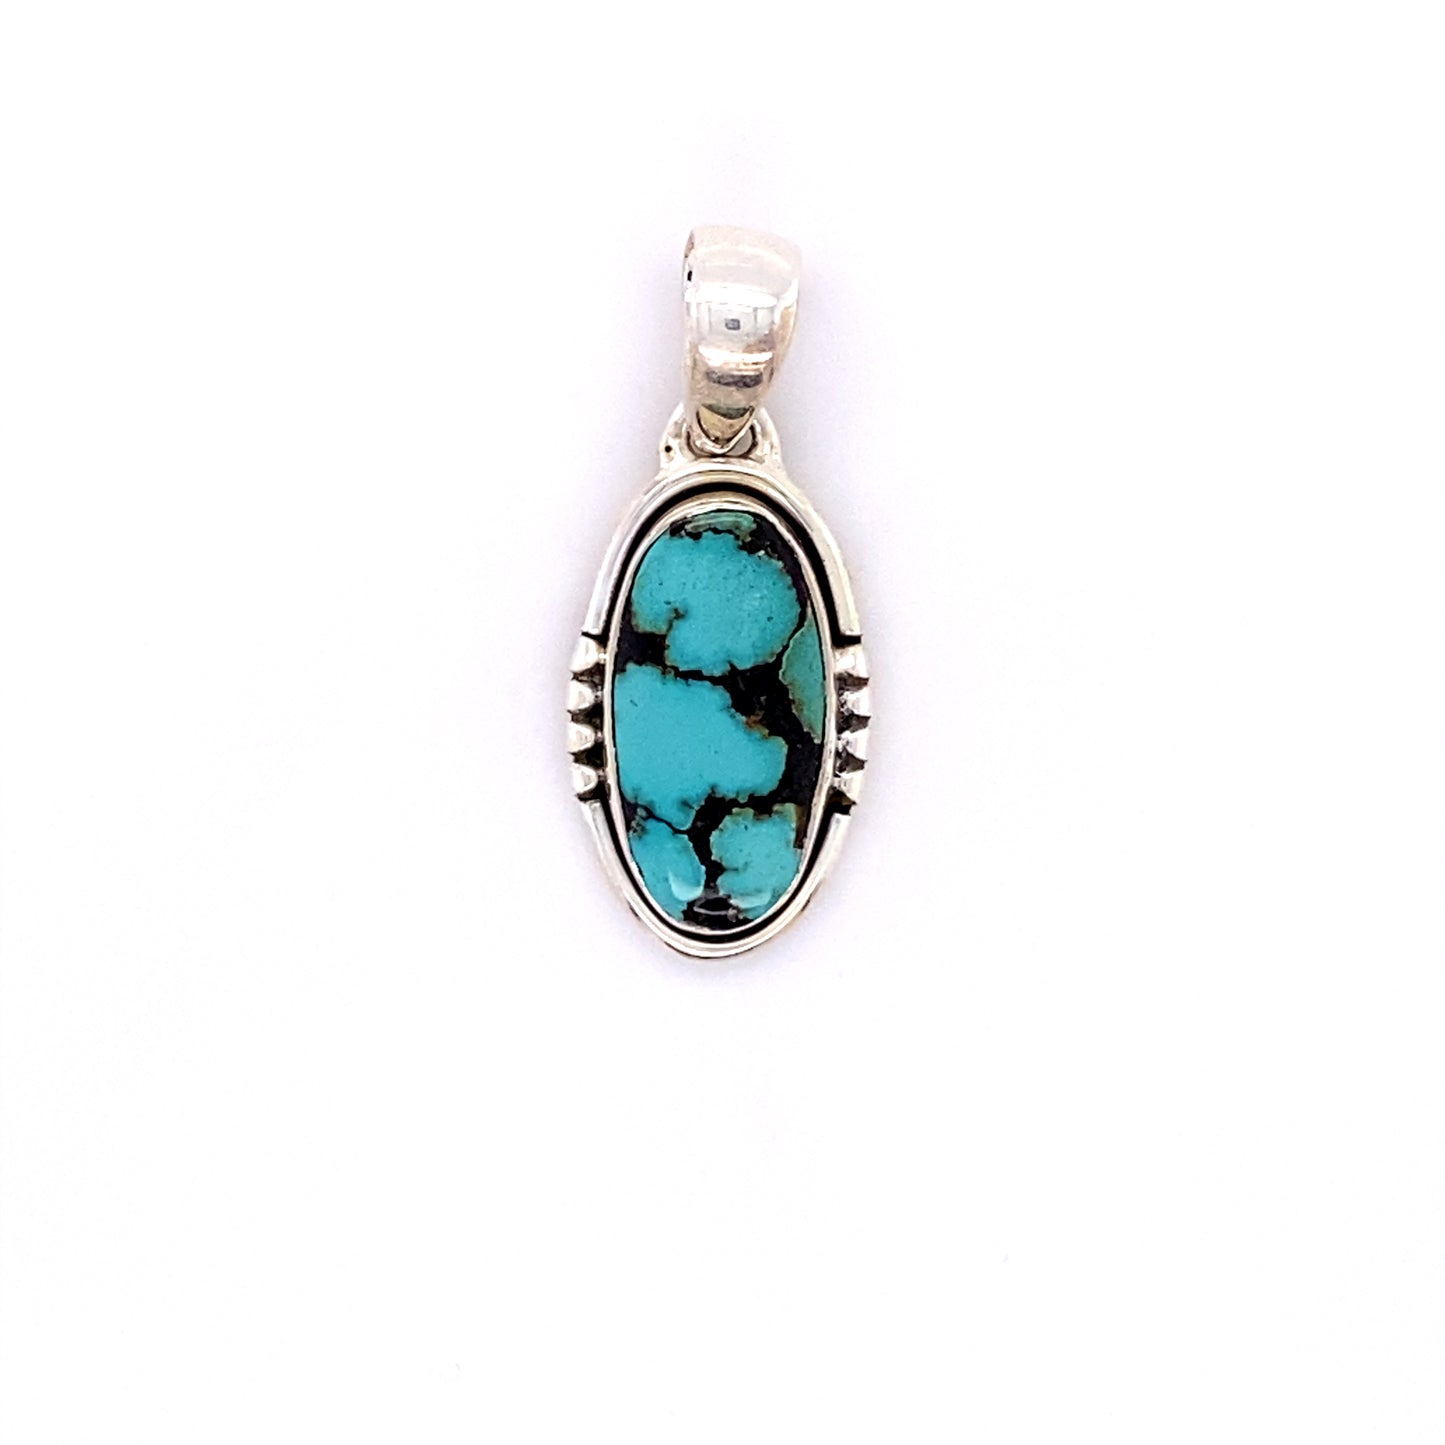 A Natural Turquoise Elongated Oval Pendant from Super Silver.